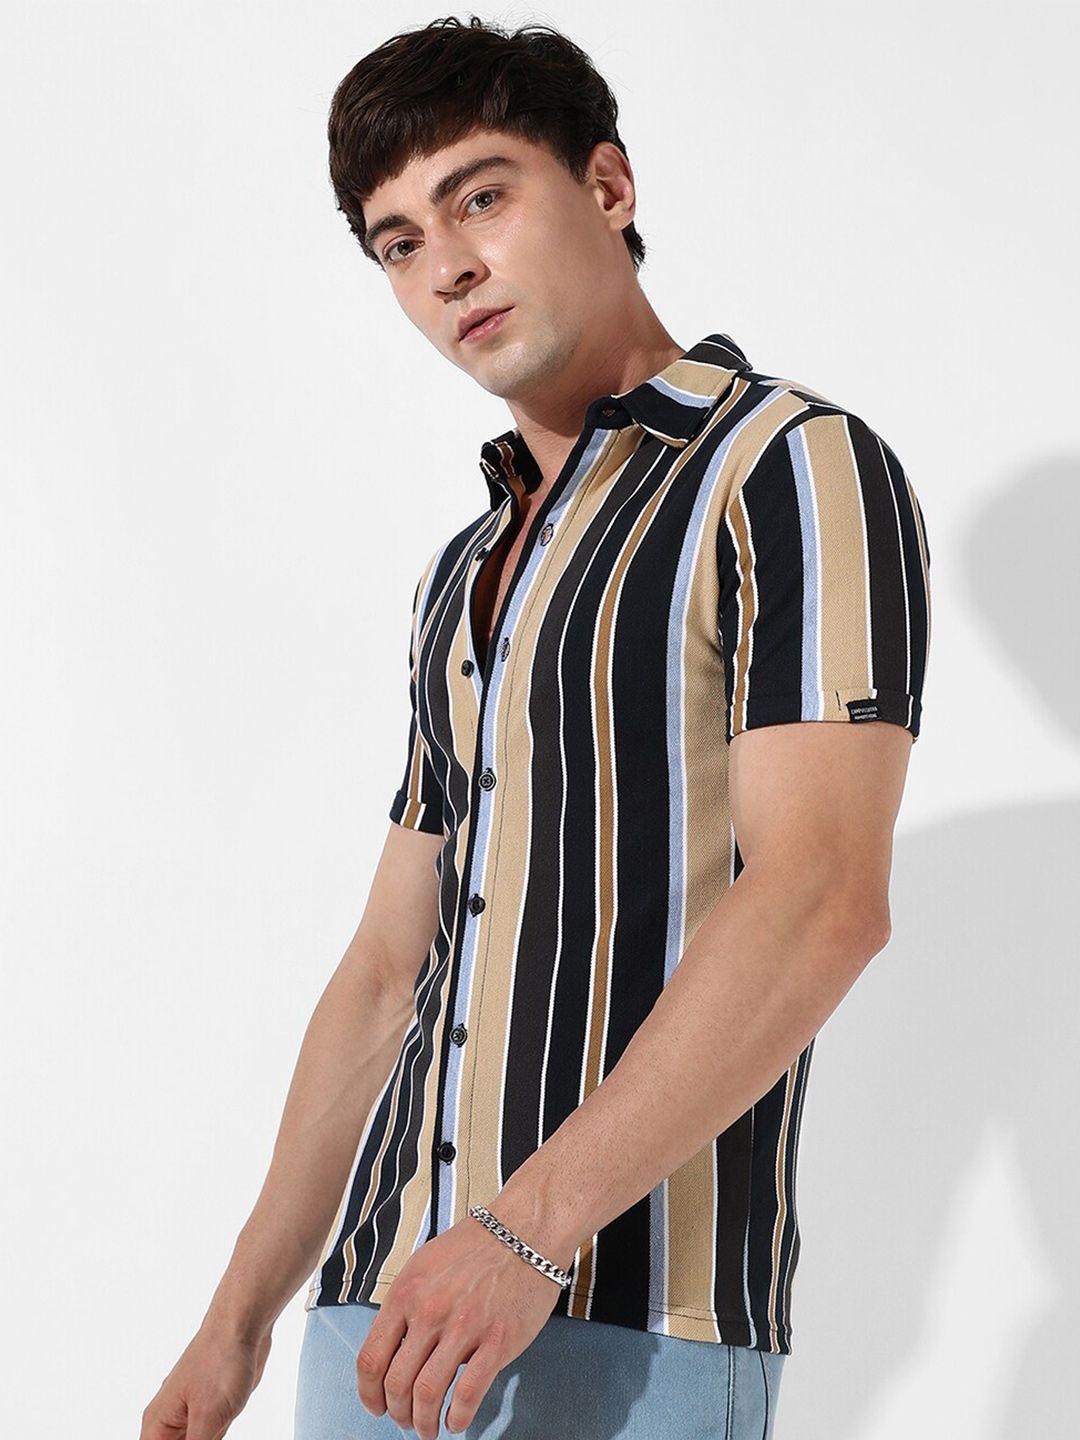 campus sutra black classic striped cotton casual shirt